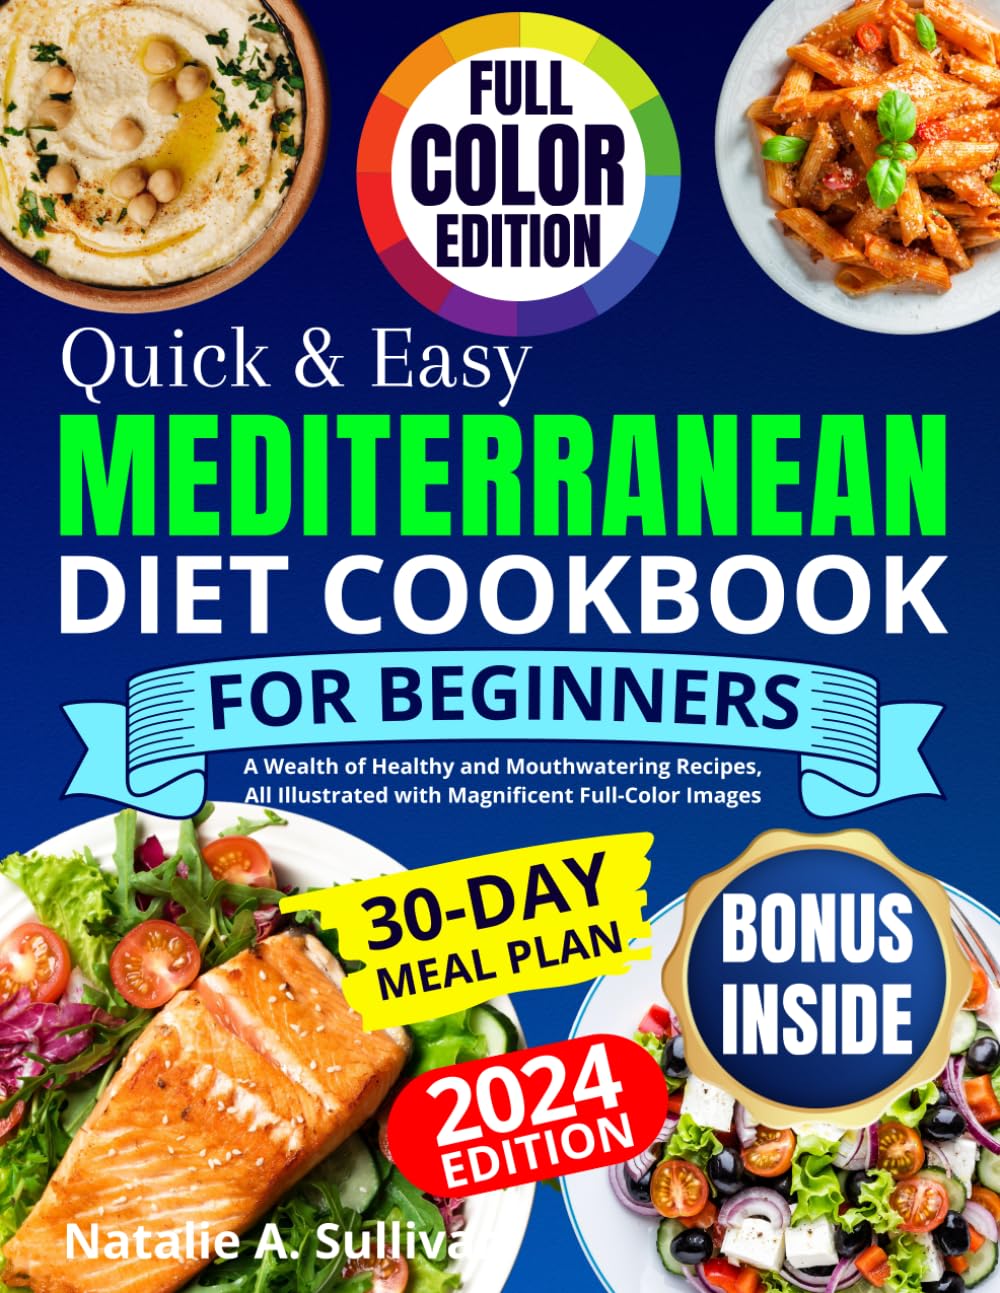 Quick & Easy Mediterranean Diet Cookbook for Beginners: A Wealth of Healthy and Mouthwatering Recipes, All Illustrated with Magnificent Full-Color Images. Incl. a 30-Day Meal Plan & Weekly Shopping